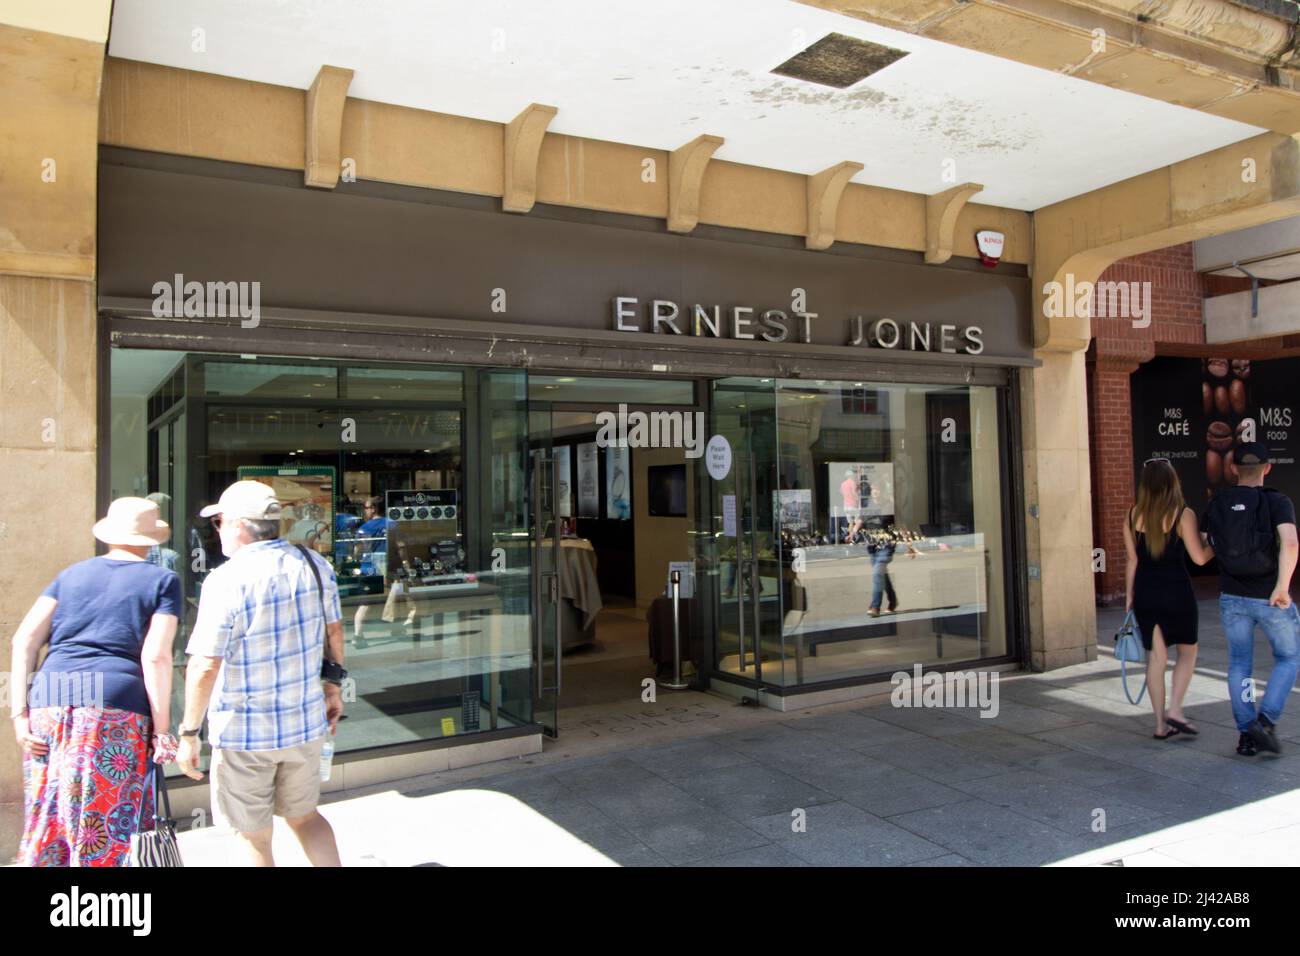 EXETER, UK - JULY 18, 2021 branch of Ernest Jones jewellers on the High Street Stock Photo